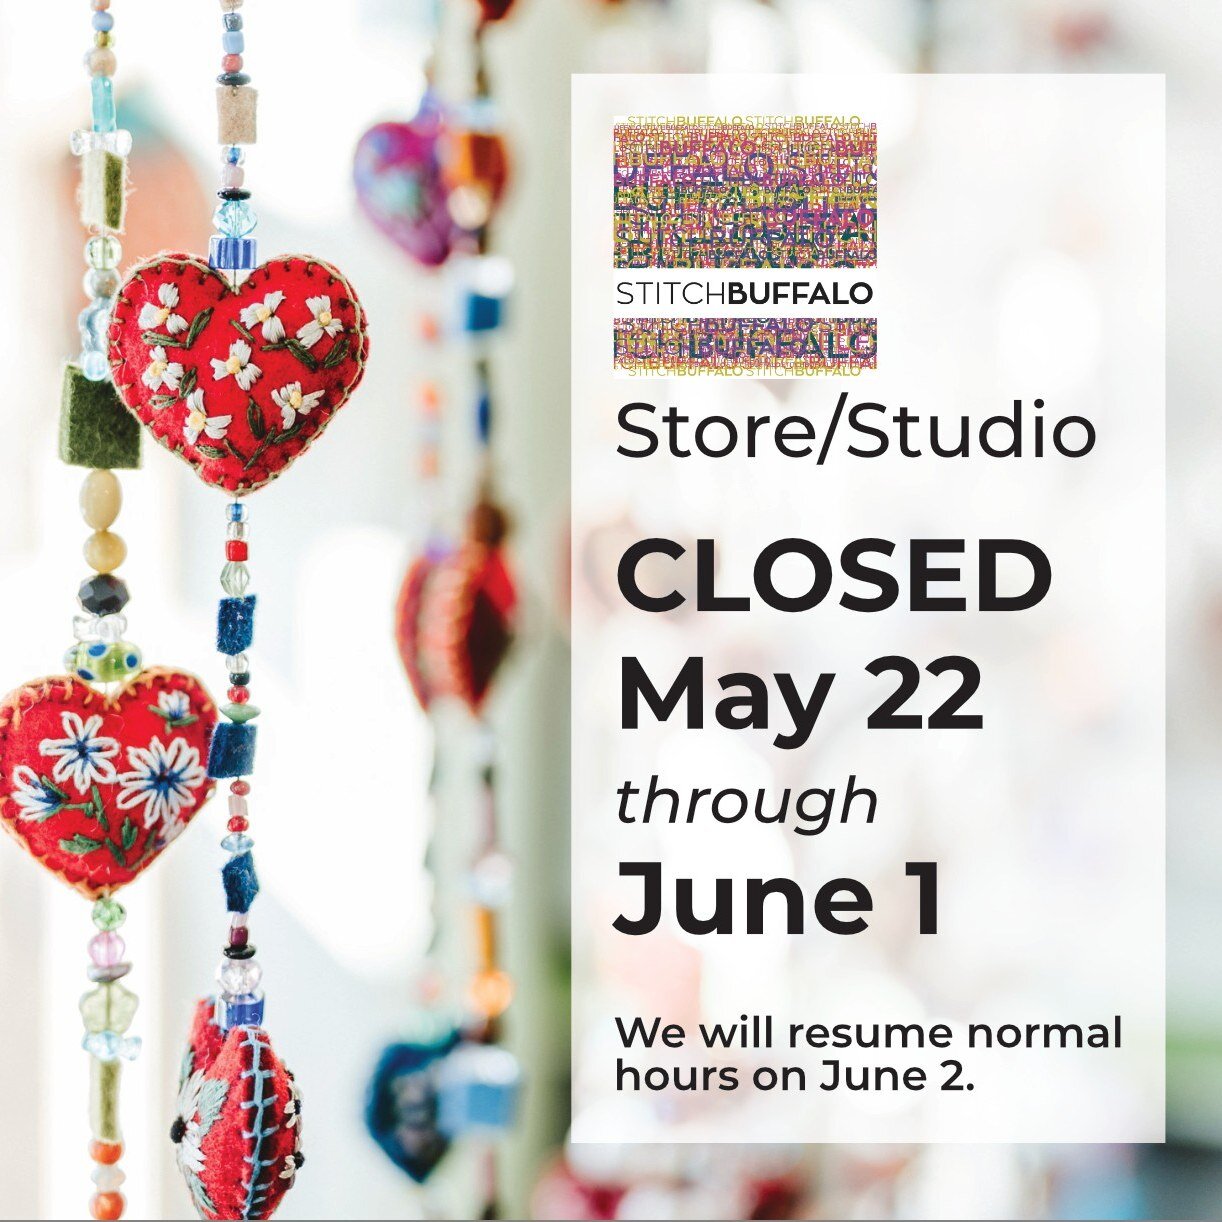 We're taking a little break, starting next week! Saturday, May 20, will be your last chance to shop in-store until we re-open on June 2. Our website store will remain open for orders to ship out.